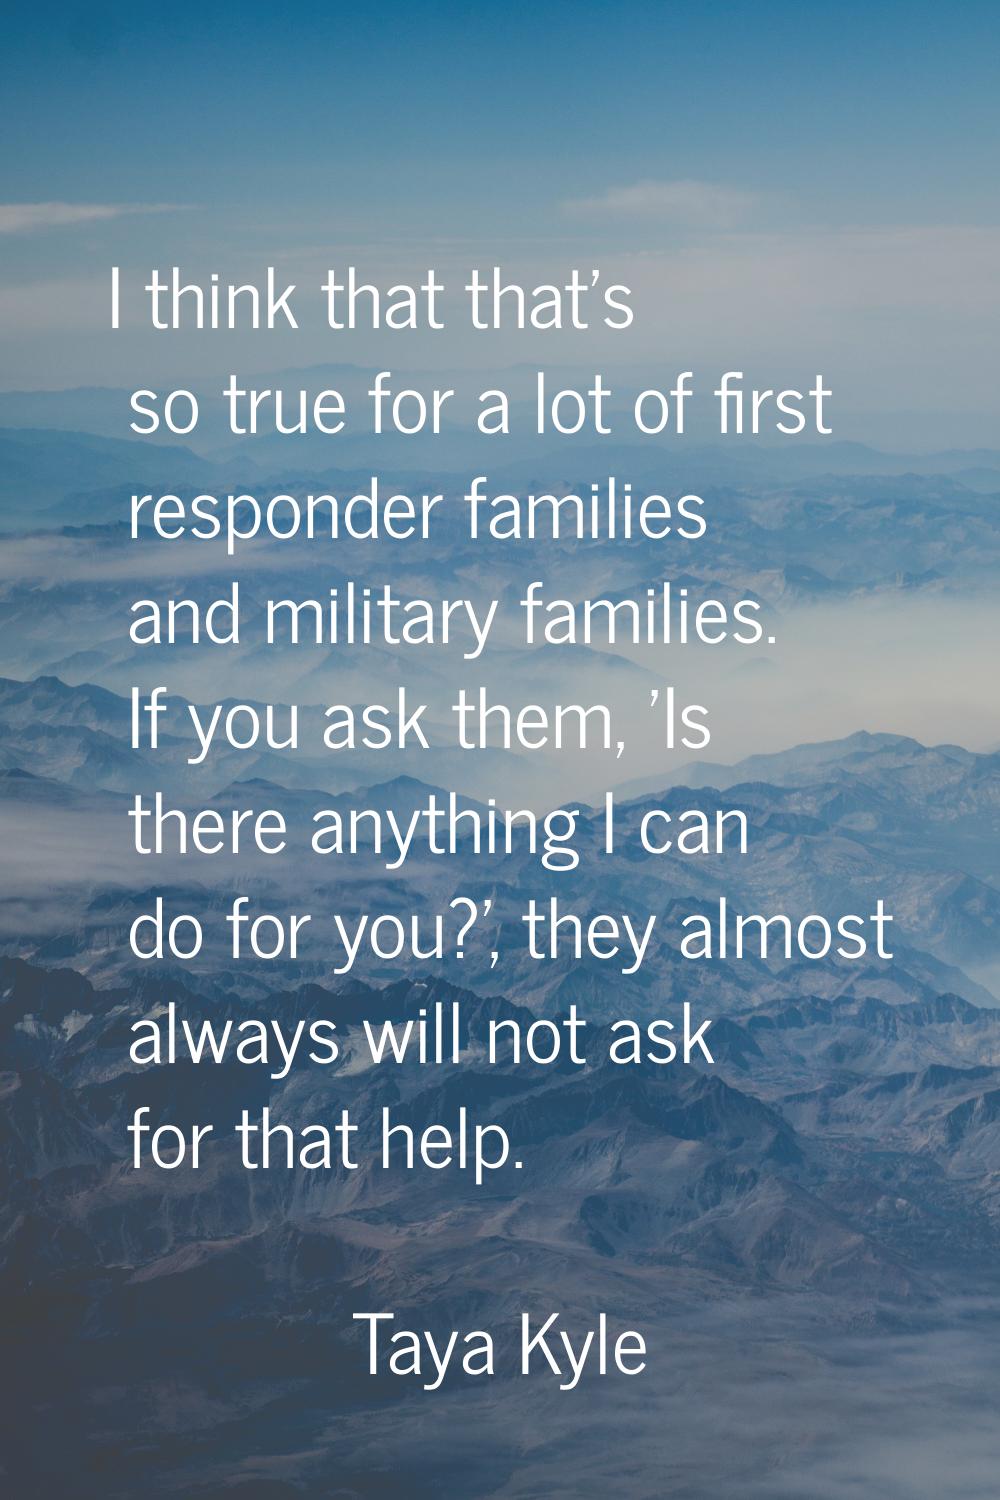 I think that that's so true for a lot of first responder families and military families. If you ask